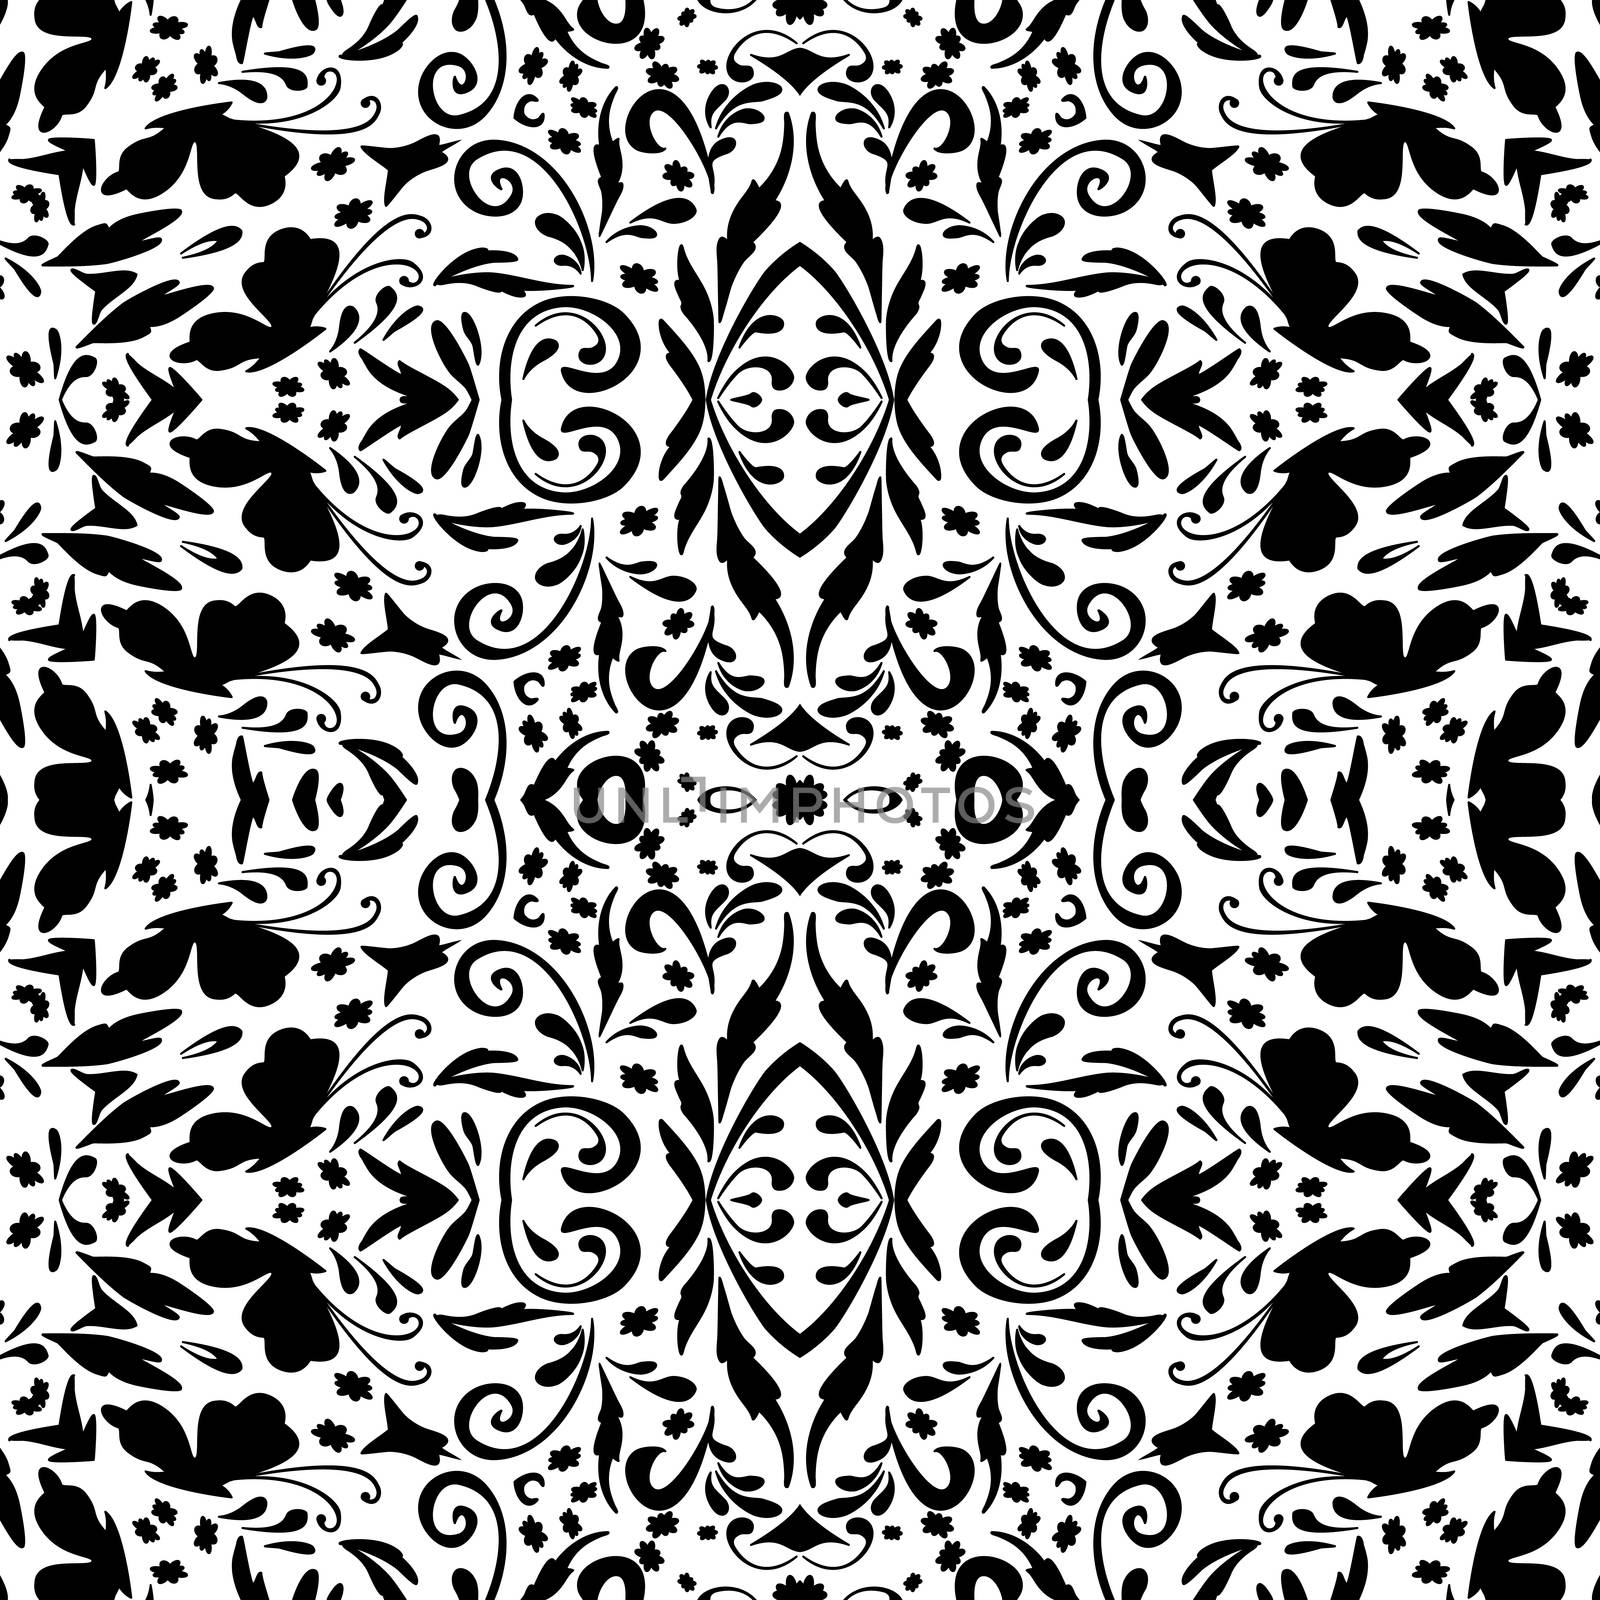 Seamless abstract floral pattern with symbolical butterflies, black silhouettes on white background.